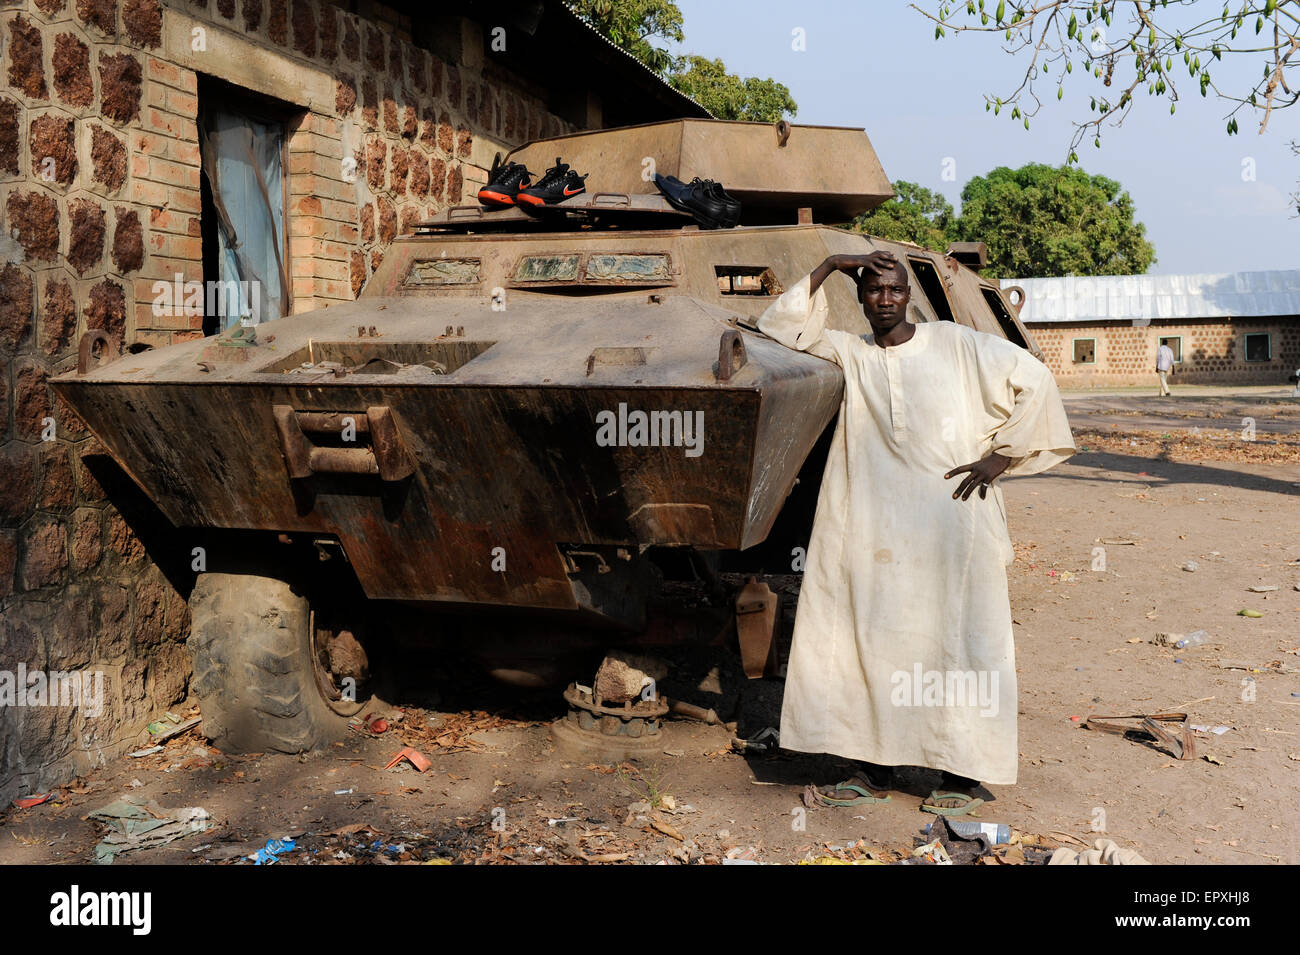 South Sudan Rumbek , old abandoned Armored car, built 1986 type Commando V-150 of company Cadillac Gage from USA, wreck from war between SPLA and northern Sudan army Stock Photo